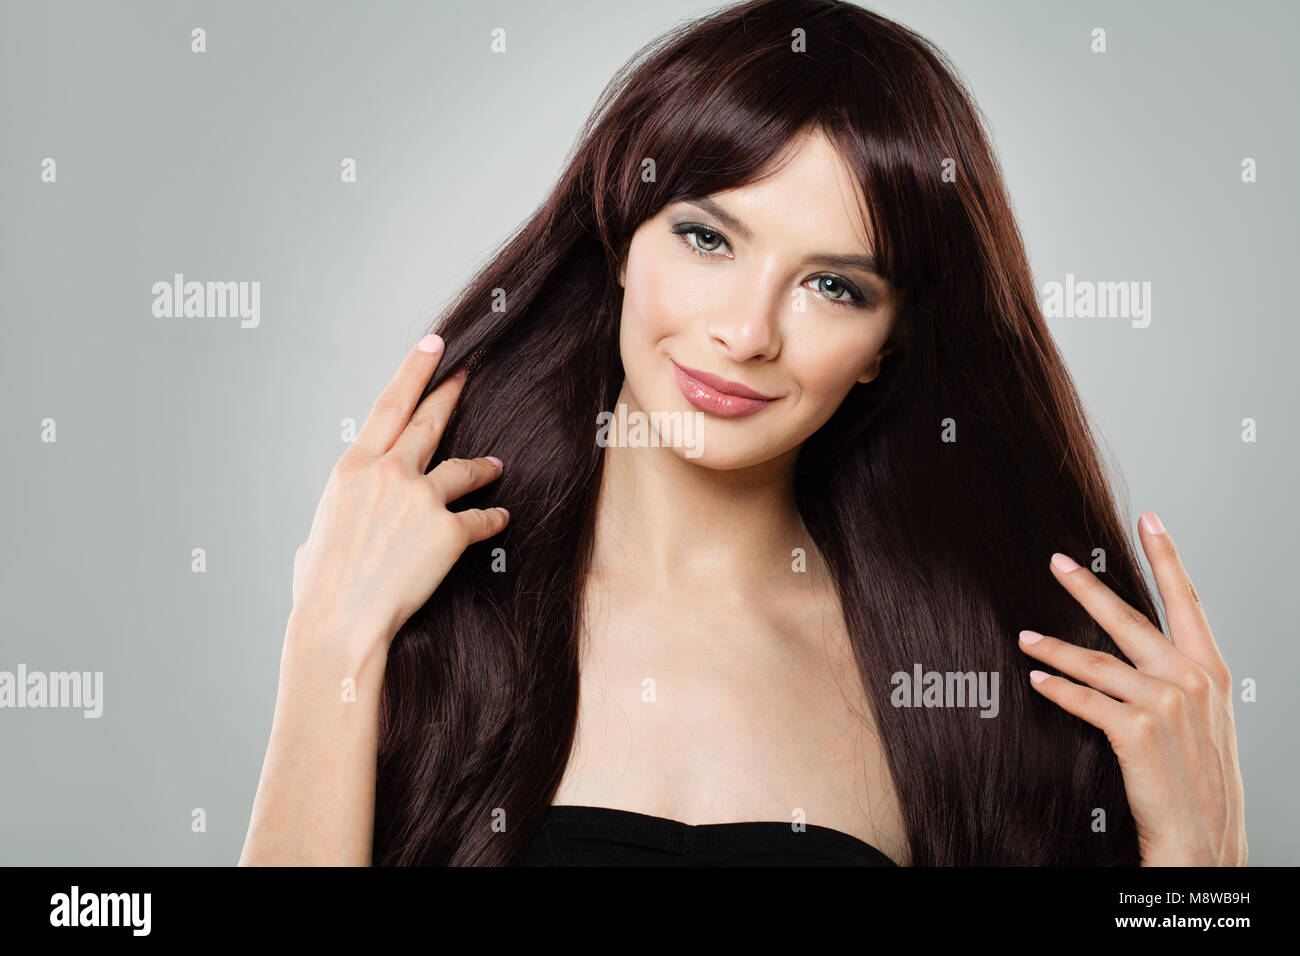 Attractive Young Model Woman with Brown Hair Stock Photo